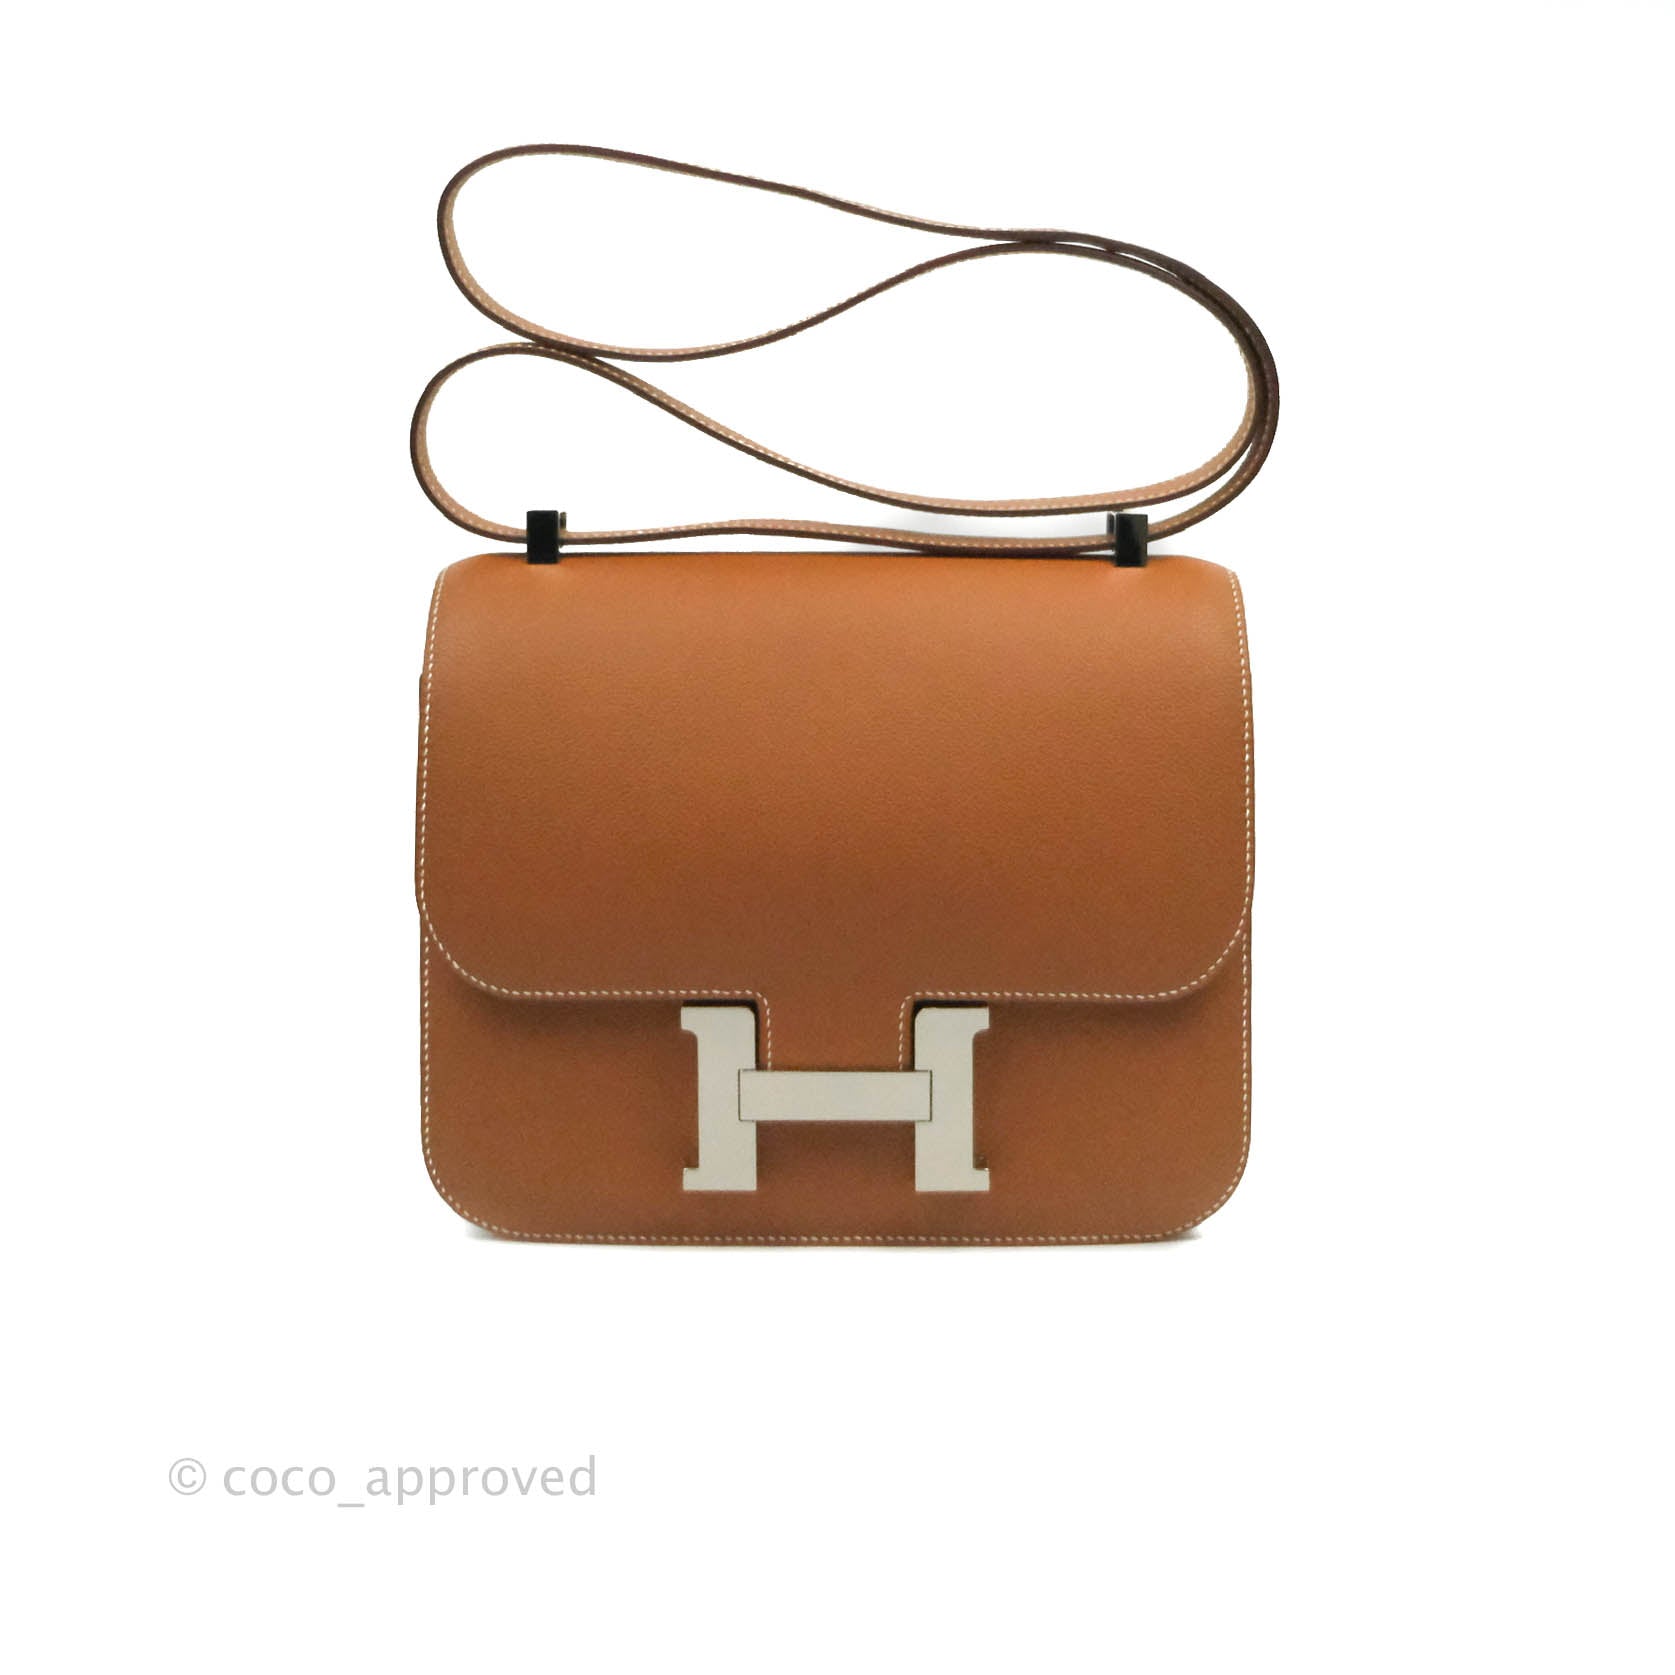 Hermès Gold Constance 24cm of Evercolor Leather with Palladium Hardware, Handbags & Accessories Online, Ecommerce Retail